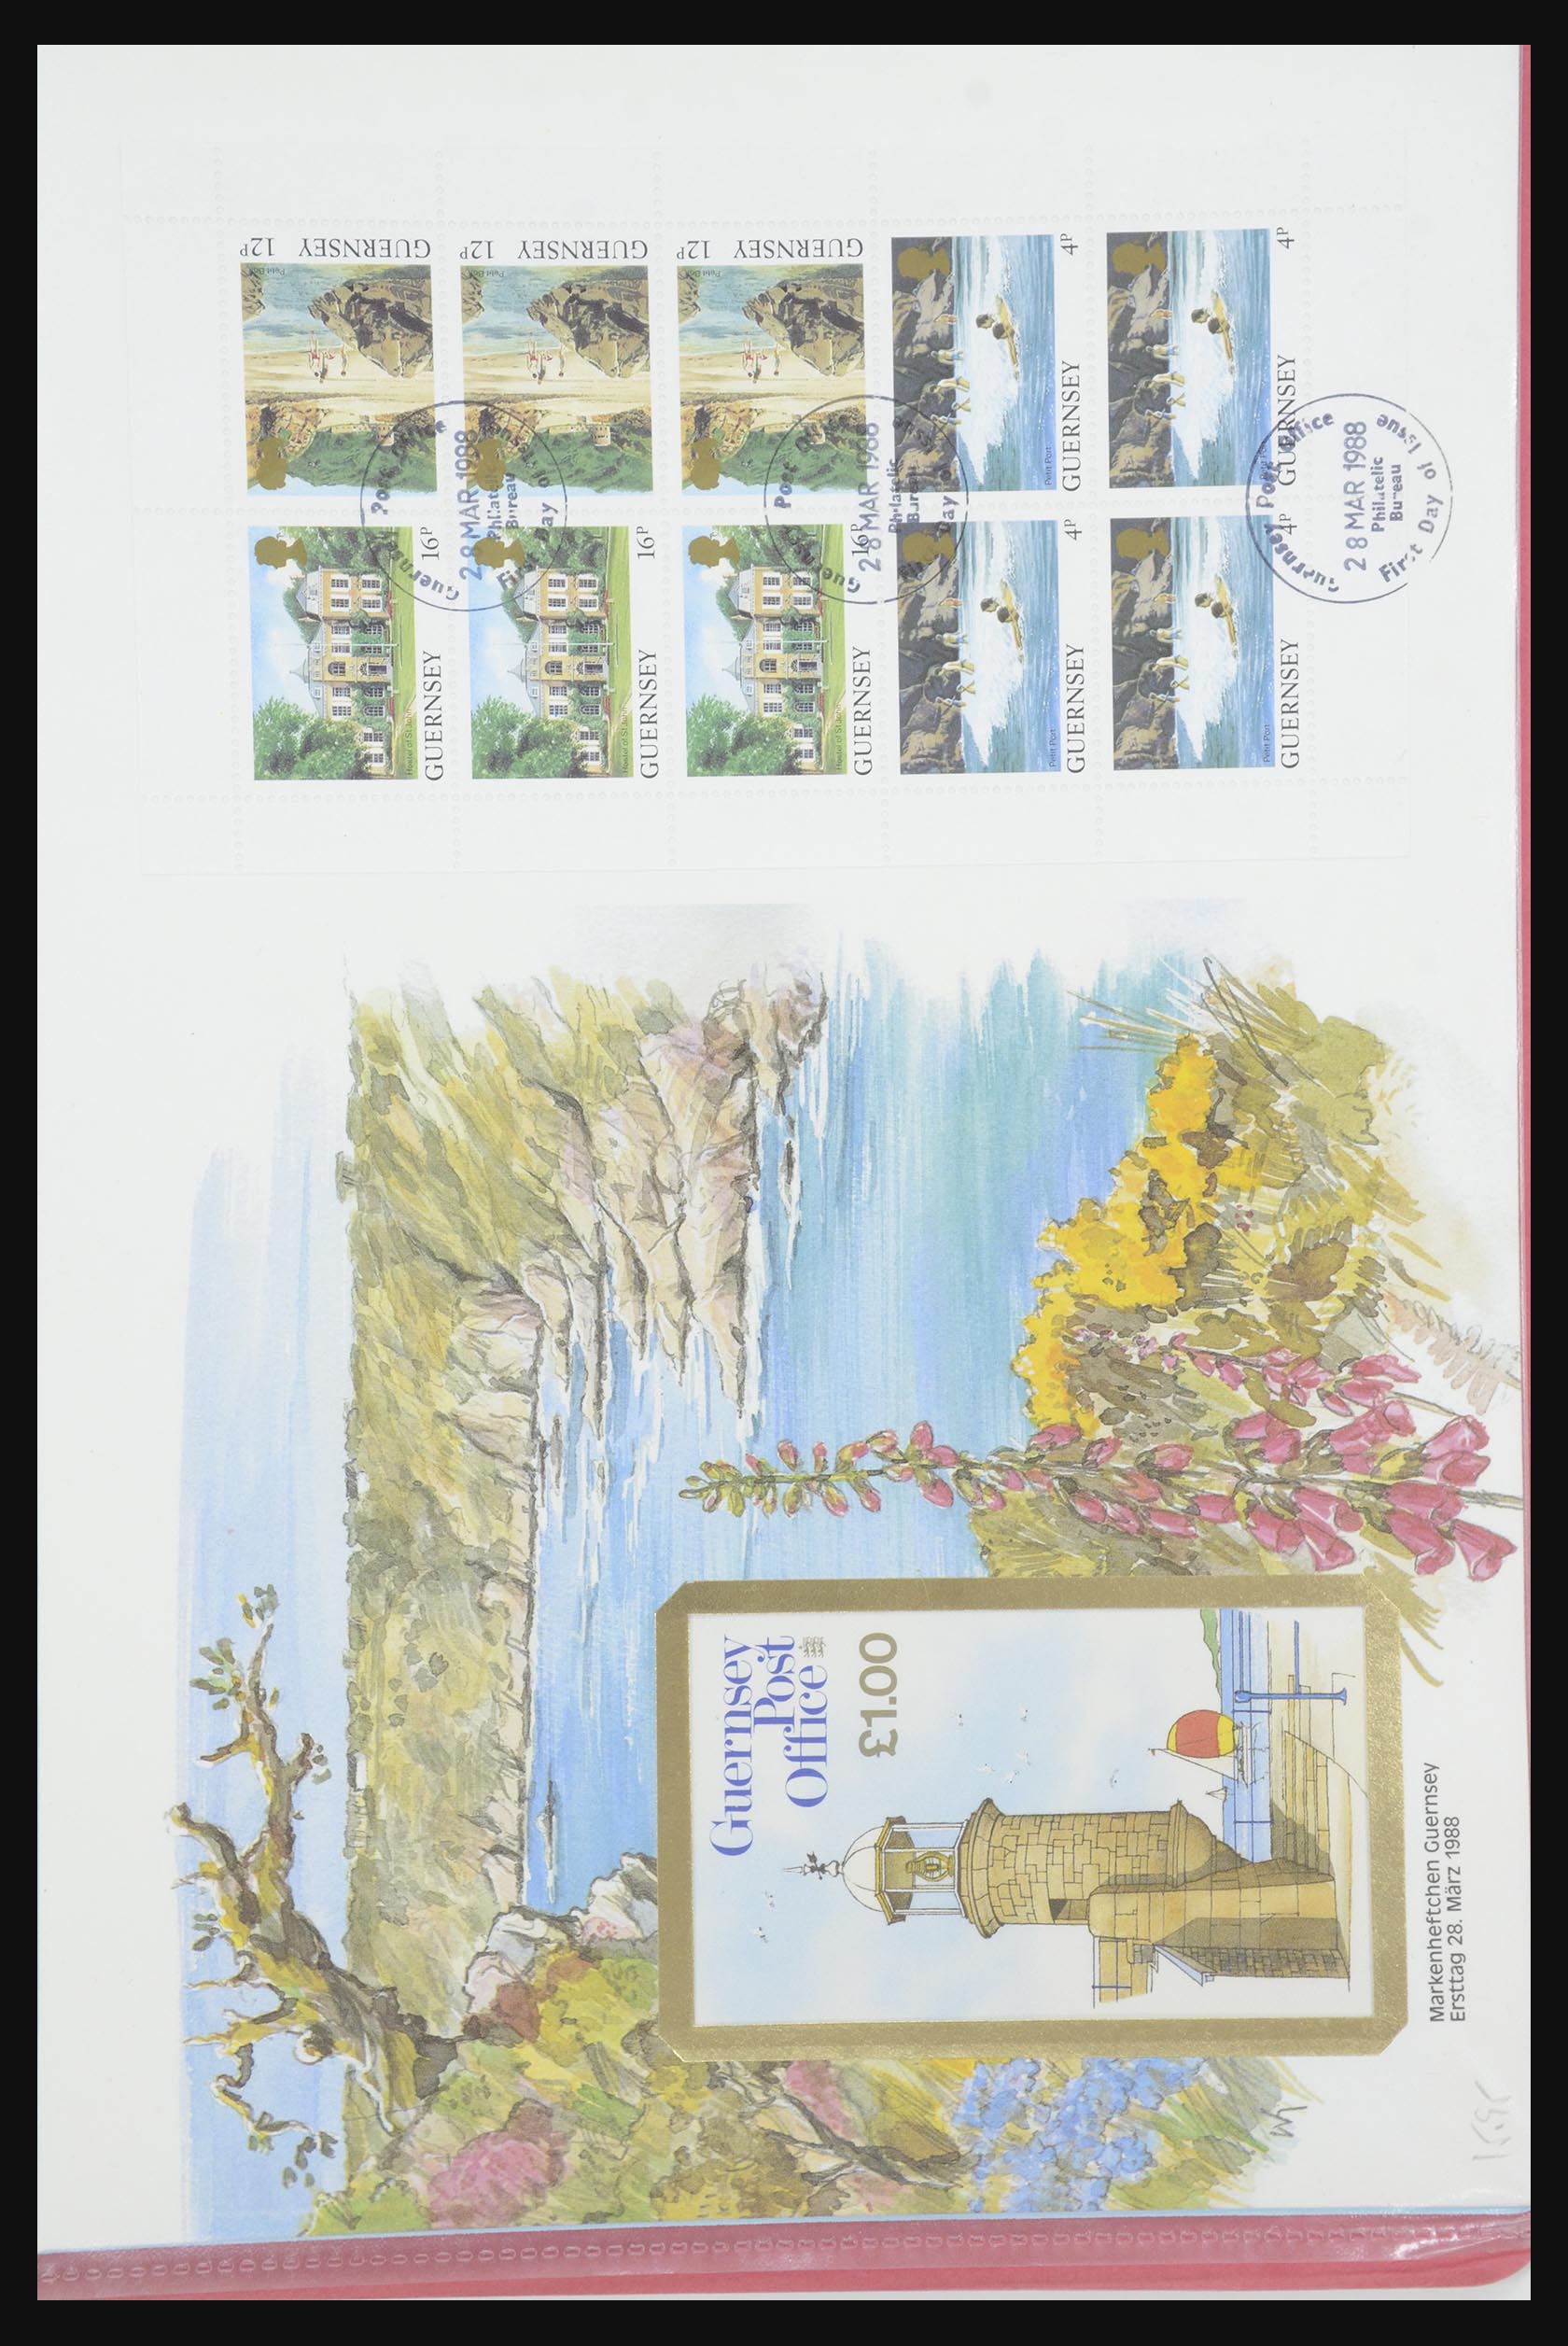 31915 362 - 31915 Western Europe souvenir sheets and stamp booklets on FDC.